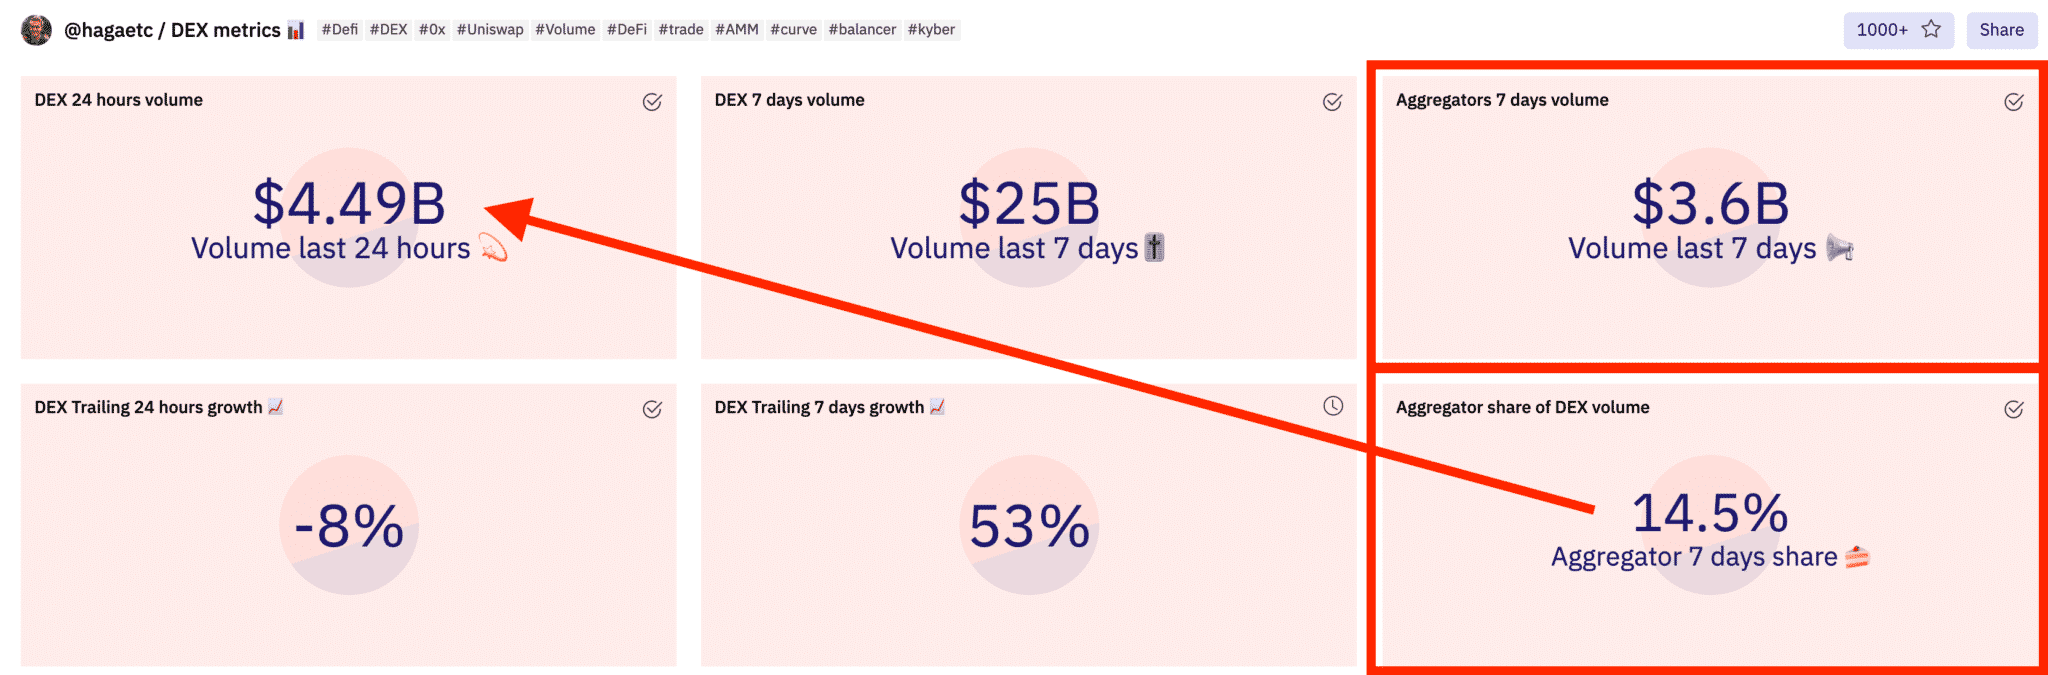 DeFi aggregators make up a growing percentage of total DEX volume (courtesy of Dune Analytics)